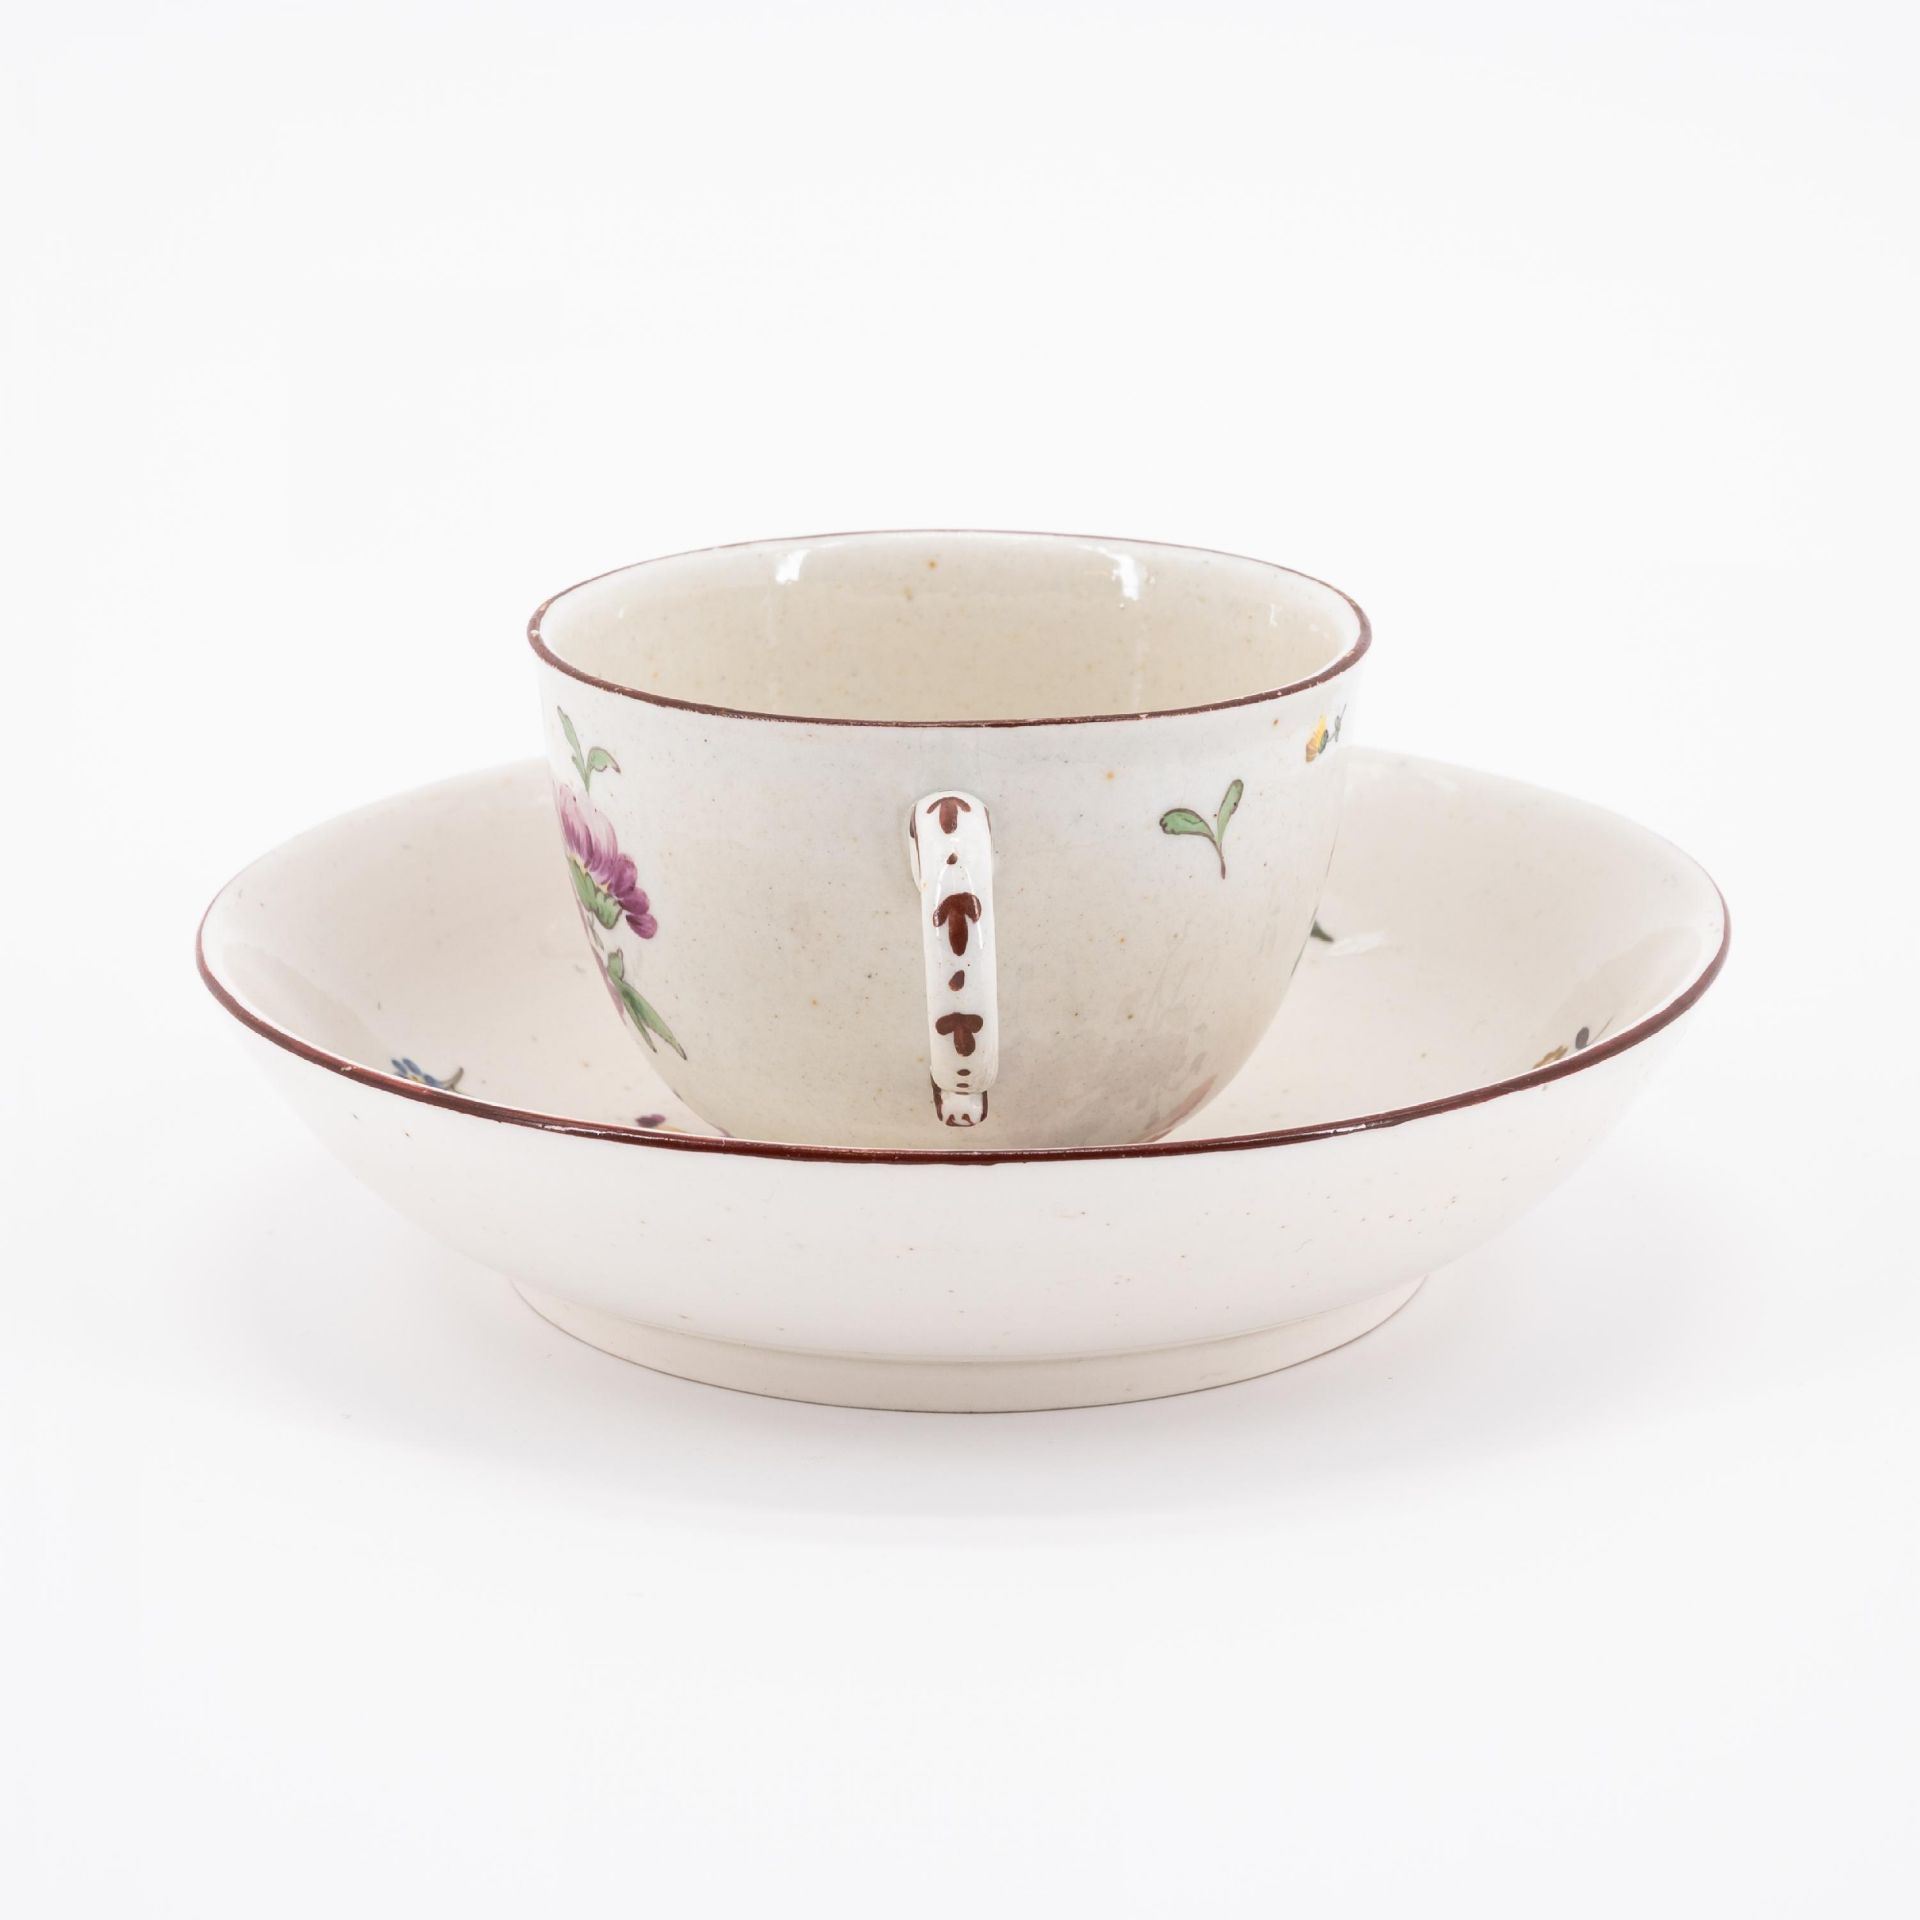 SIX PORCELAIN CUPS AND THREE SAUCERS WITH BIRD DECOR, FLOWERS AND LANDSCAPE SCENES - Image 13 of 16